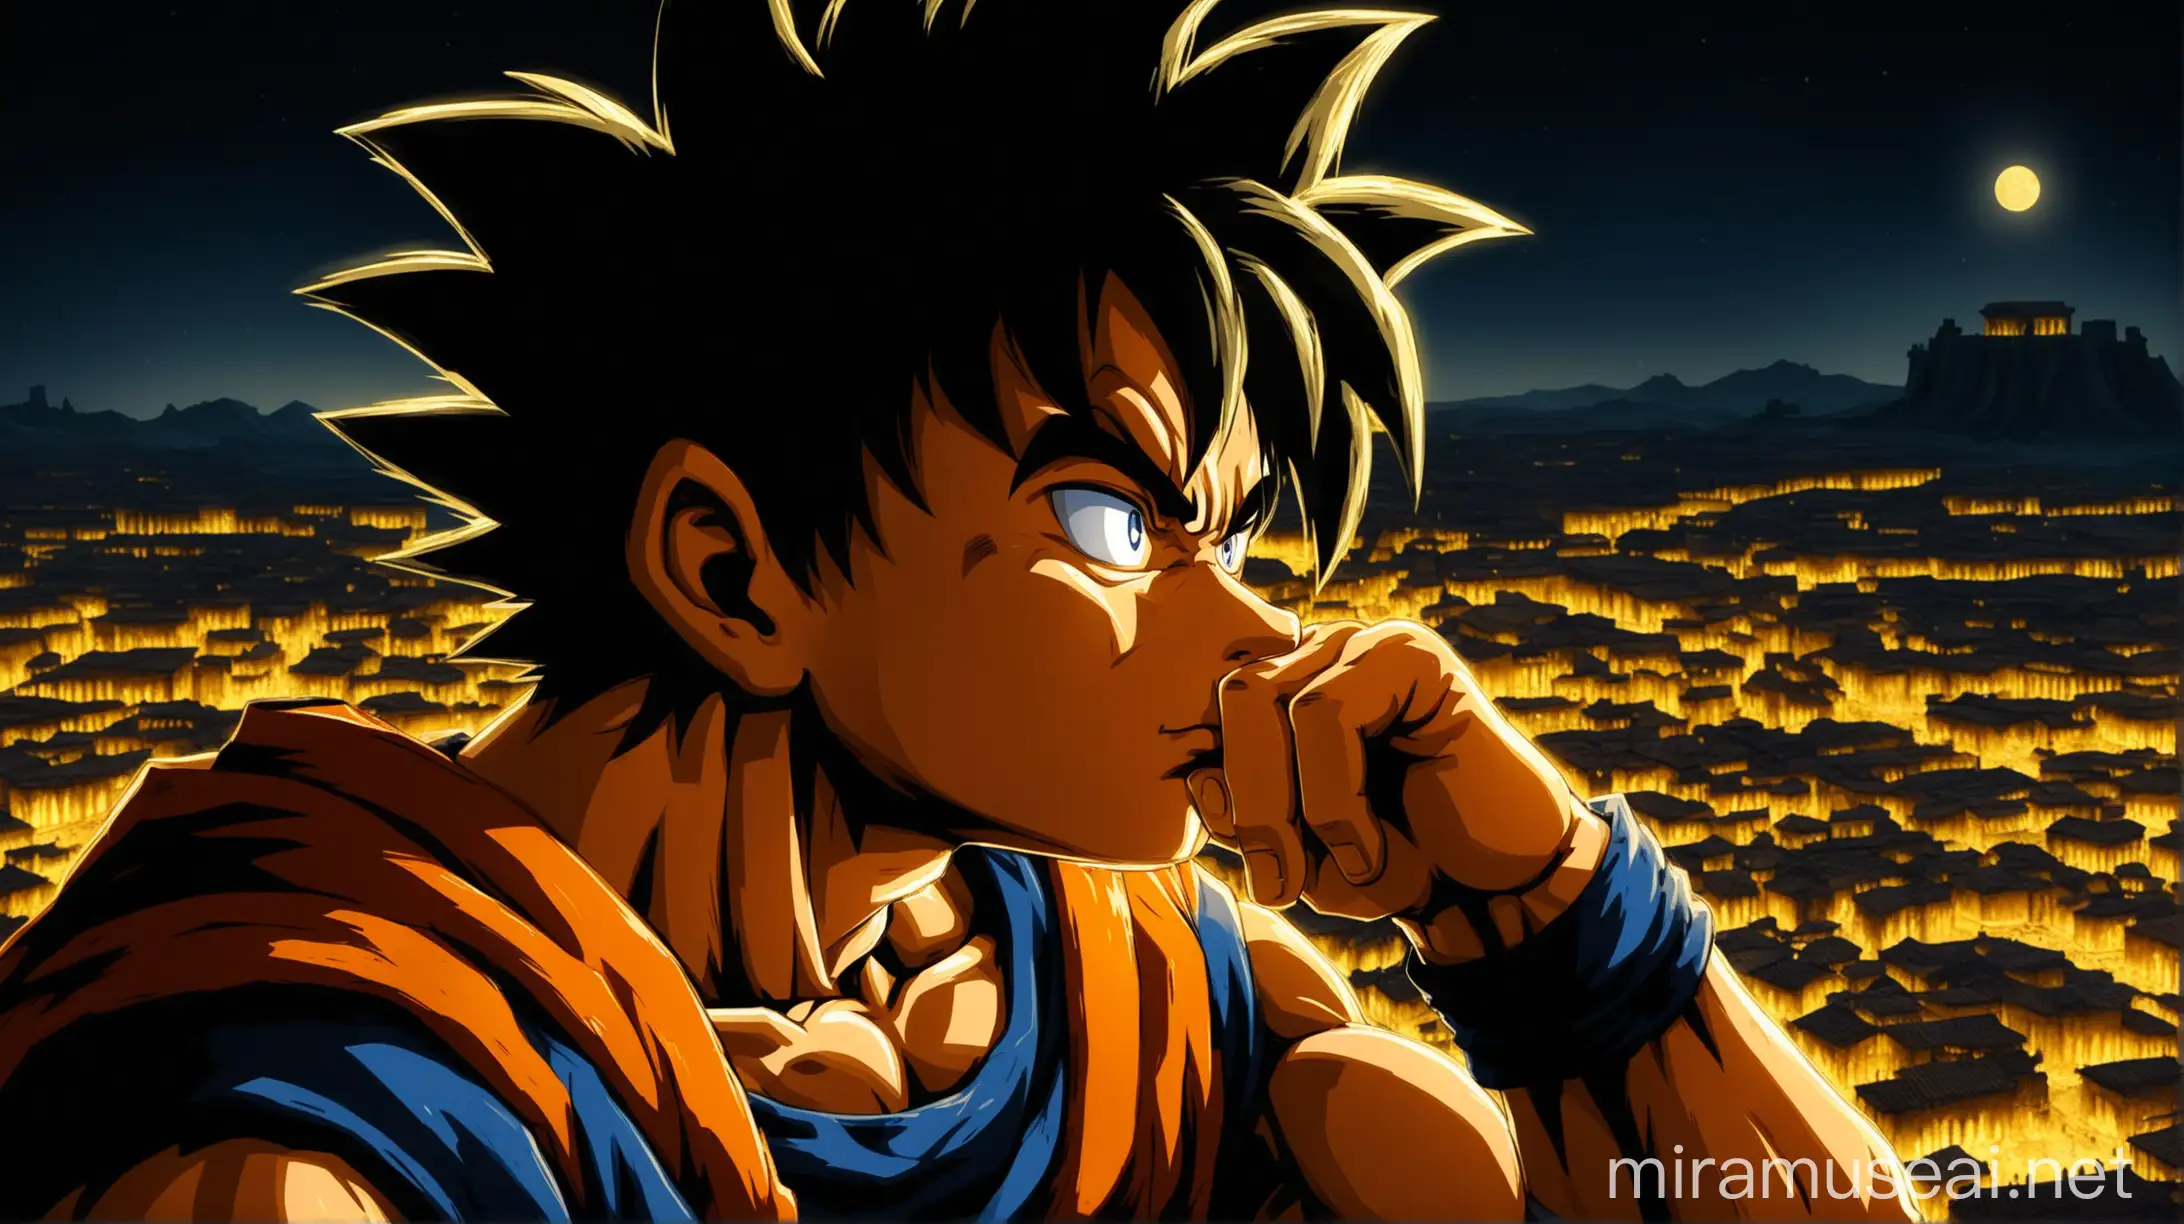 Contemplative Goku with Intricate Facial Details Against Nighttime Roman Empire Backdrop